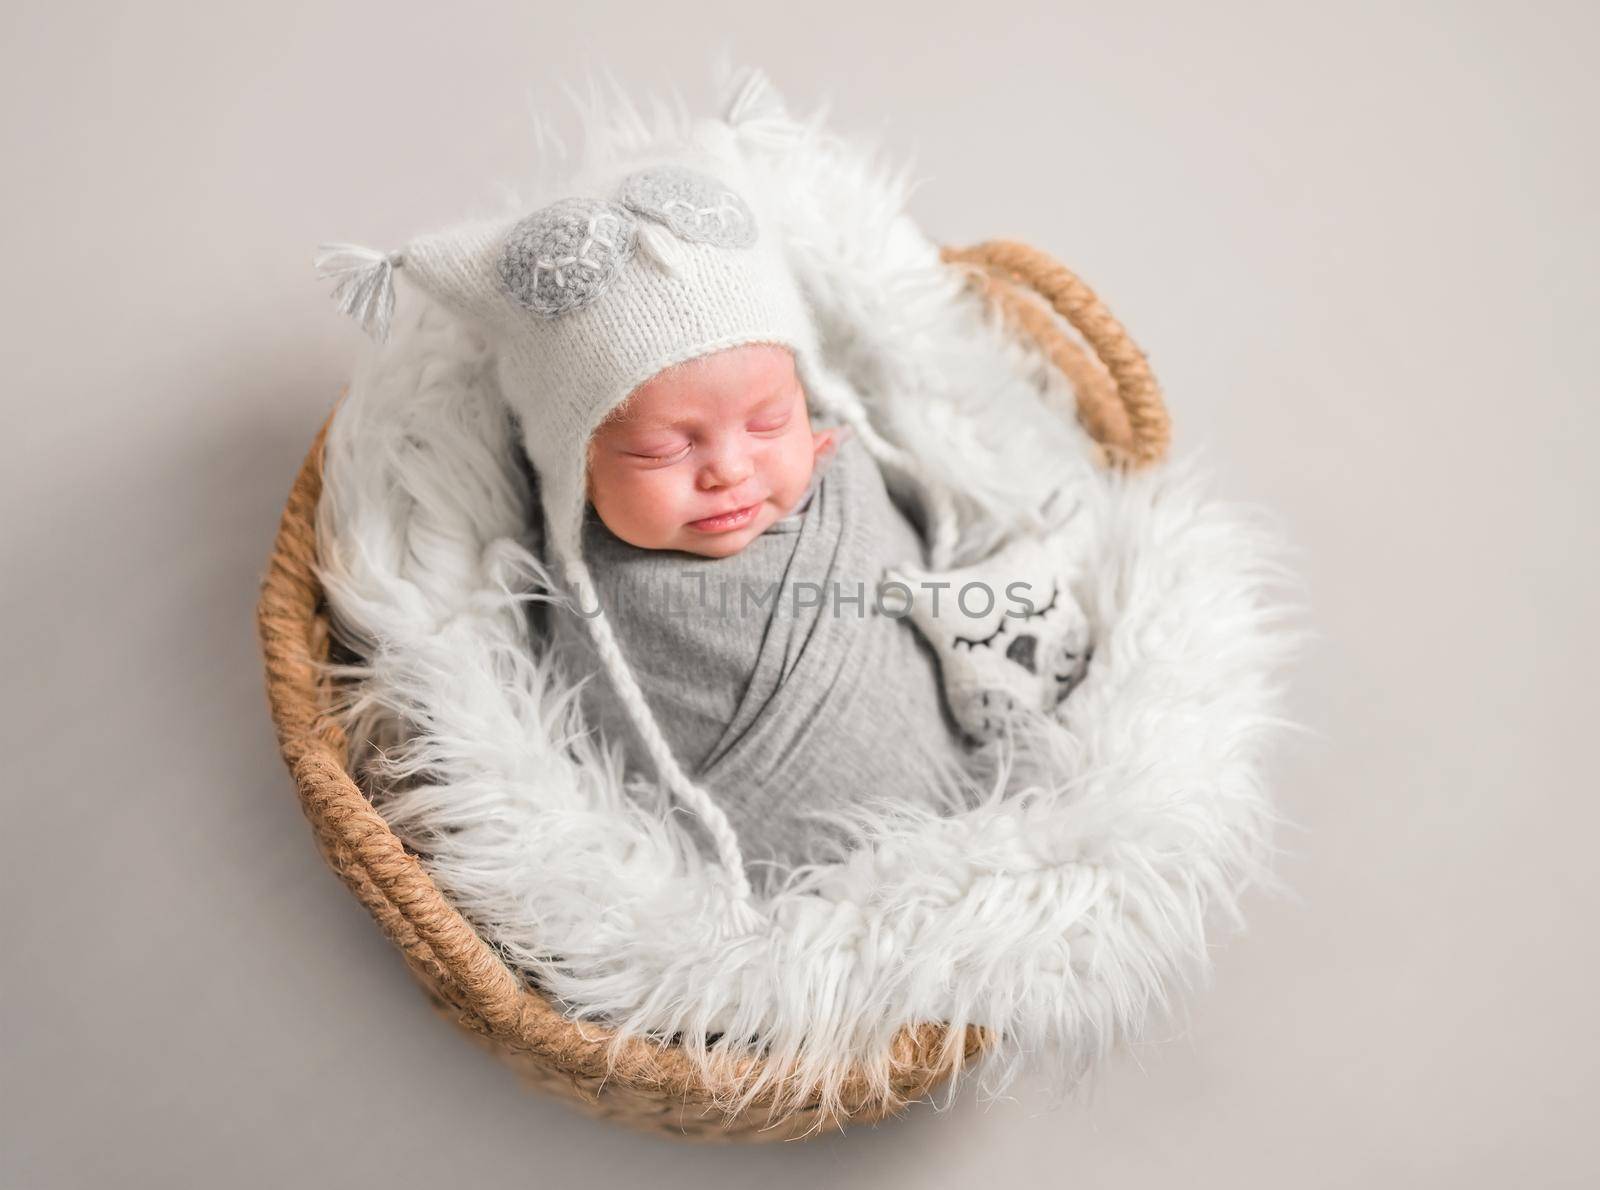 Little cute baby in white knitted beanie covered with gray coverlet sweetly sleeping on white soft blanket with toy owl in the basket